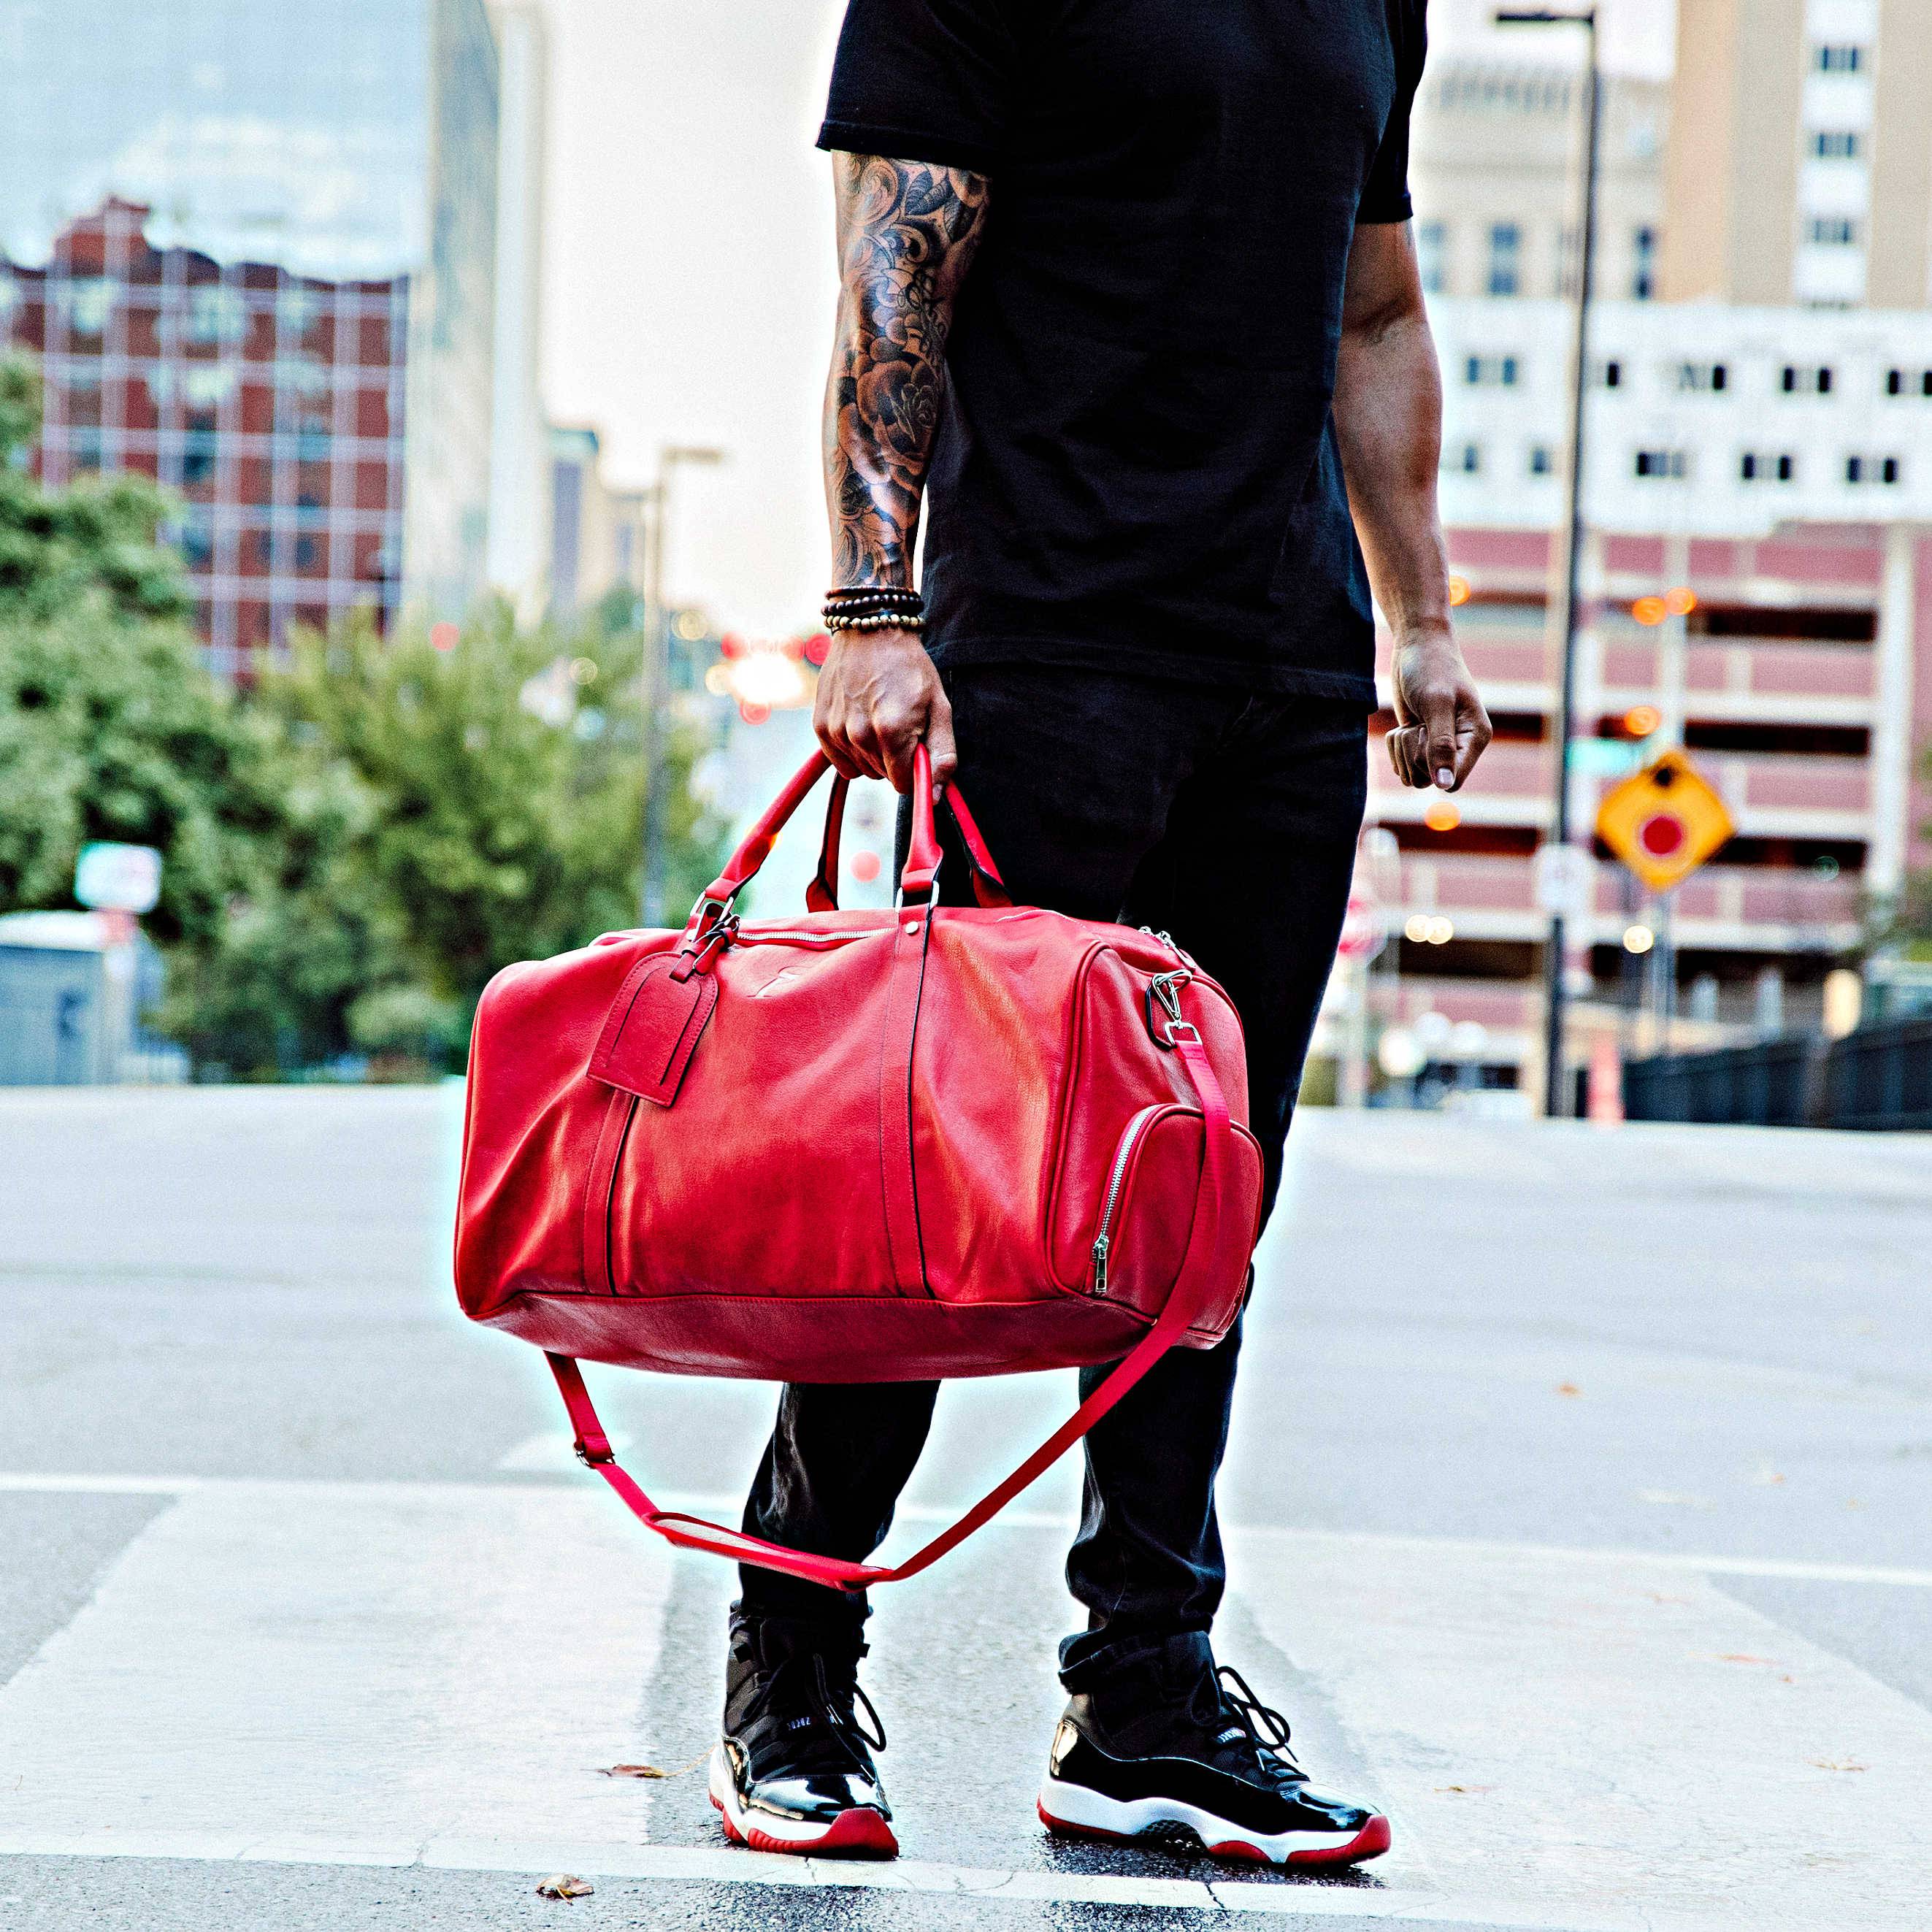 Red Tumbled Leather 2 Bag Set (Commuter and Duffle) - Sole Premise